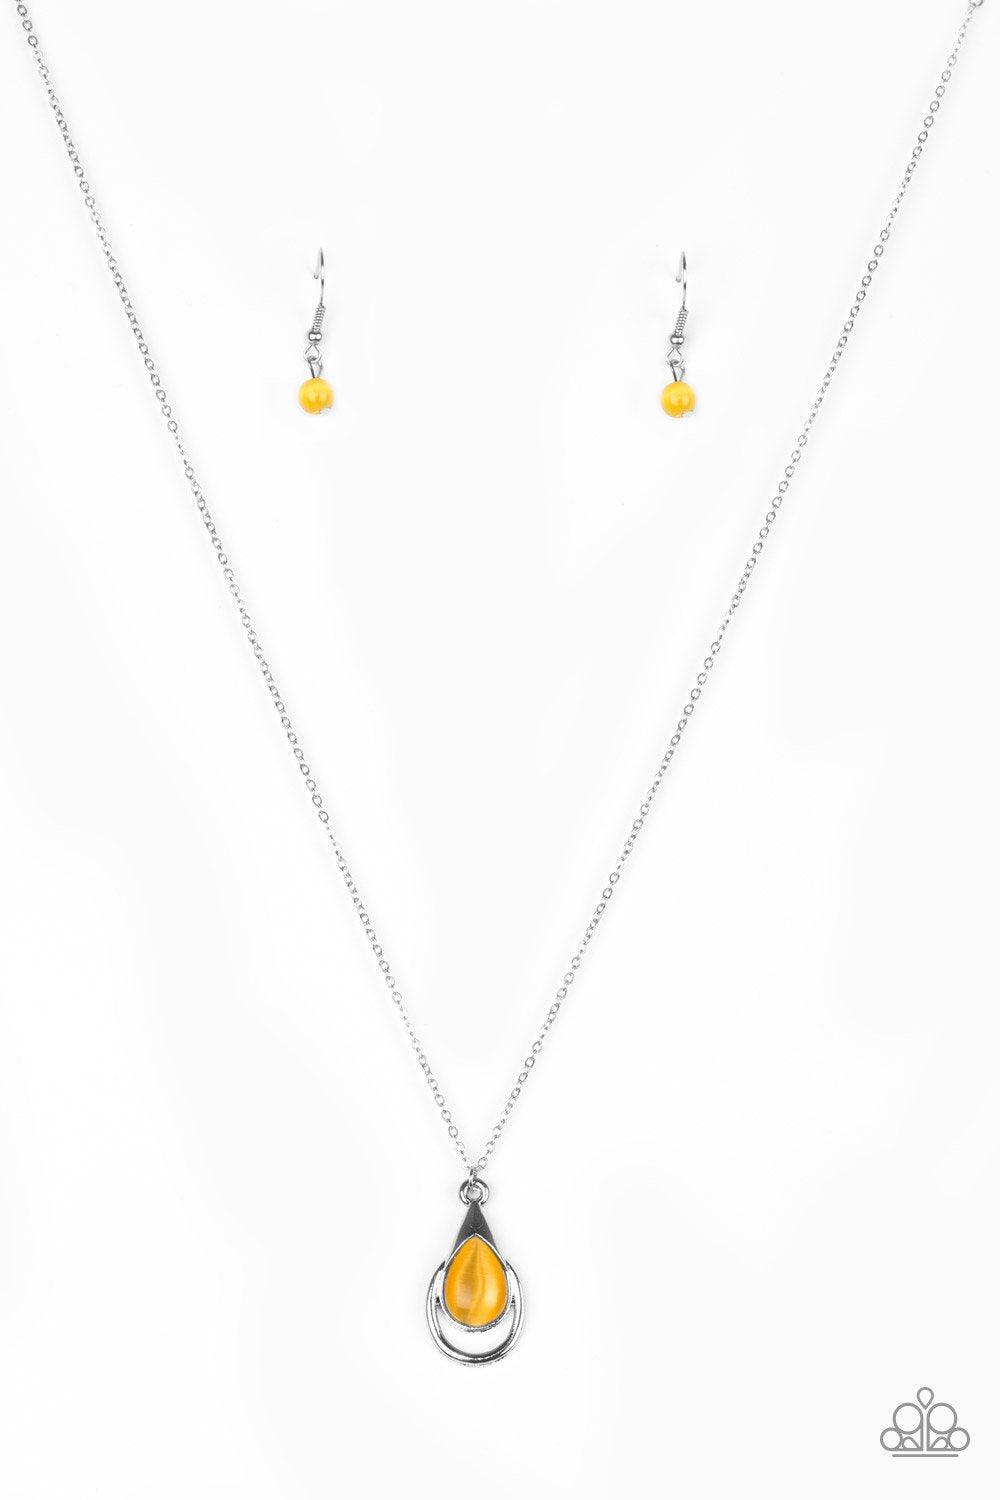 Just Drop It Silver and Yellow Moonstone Teardrop Necklace - Paparazzi Accessories-CarasShop.com - $5 Jewelry by Cara Jewels